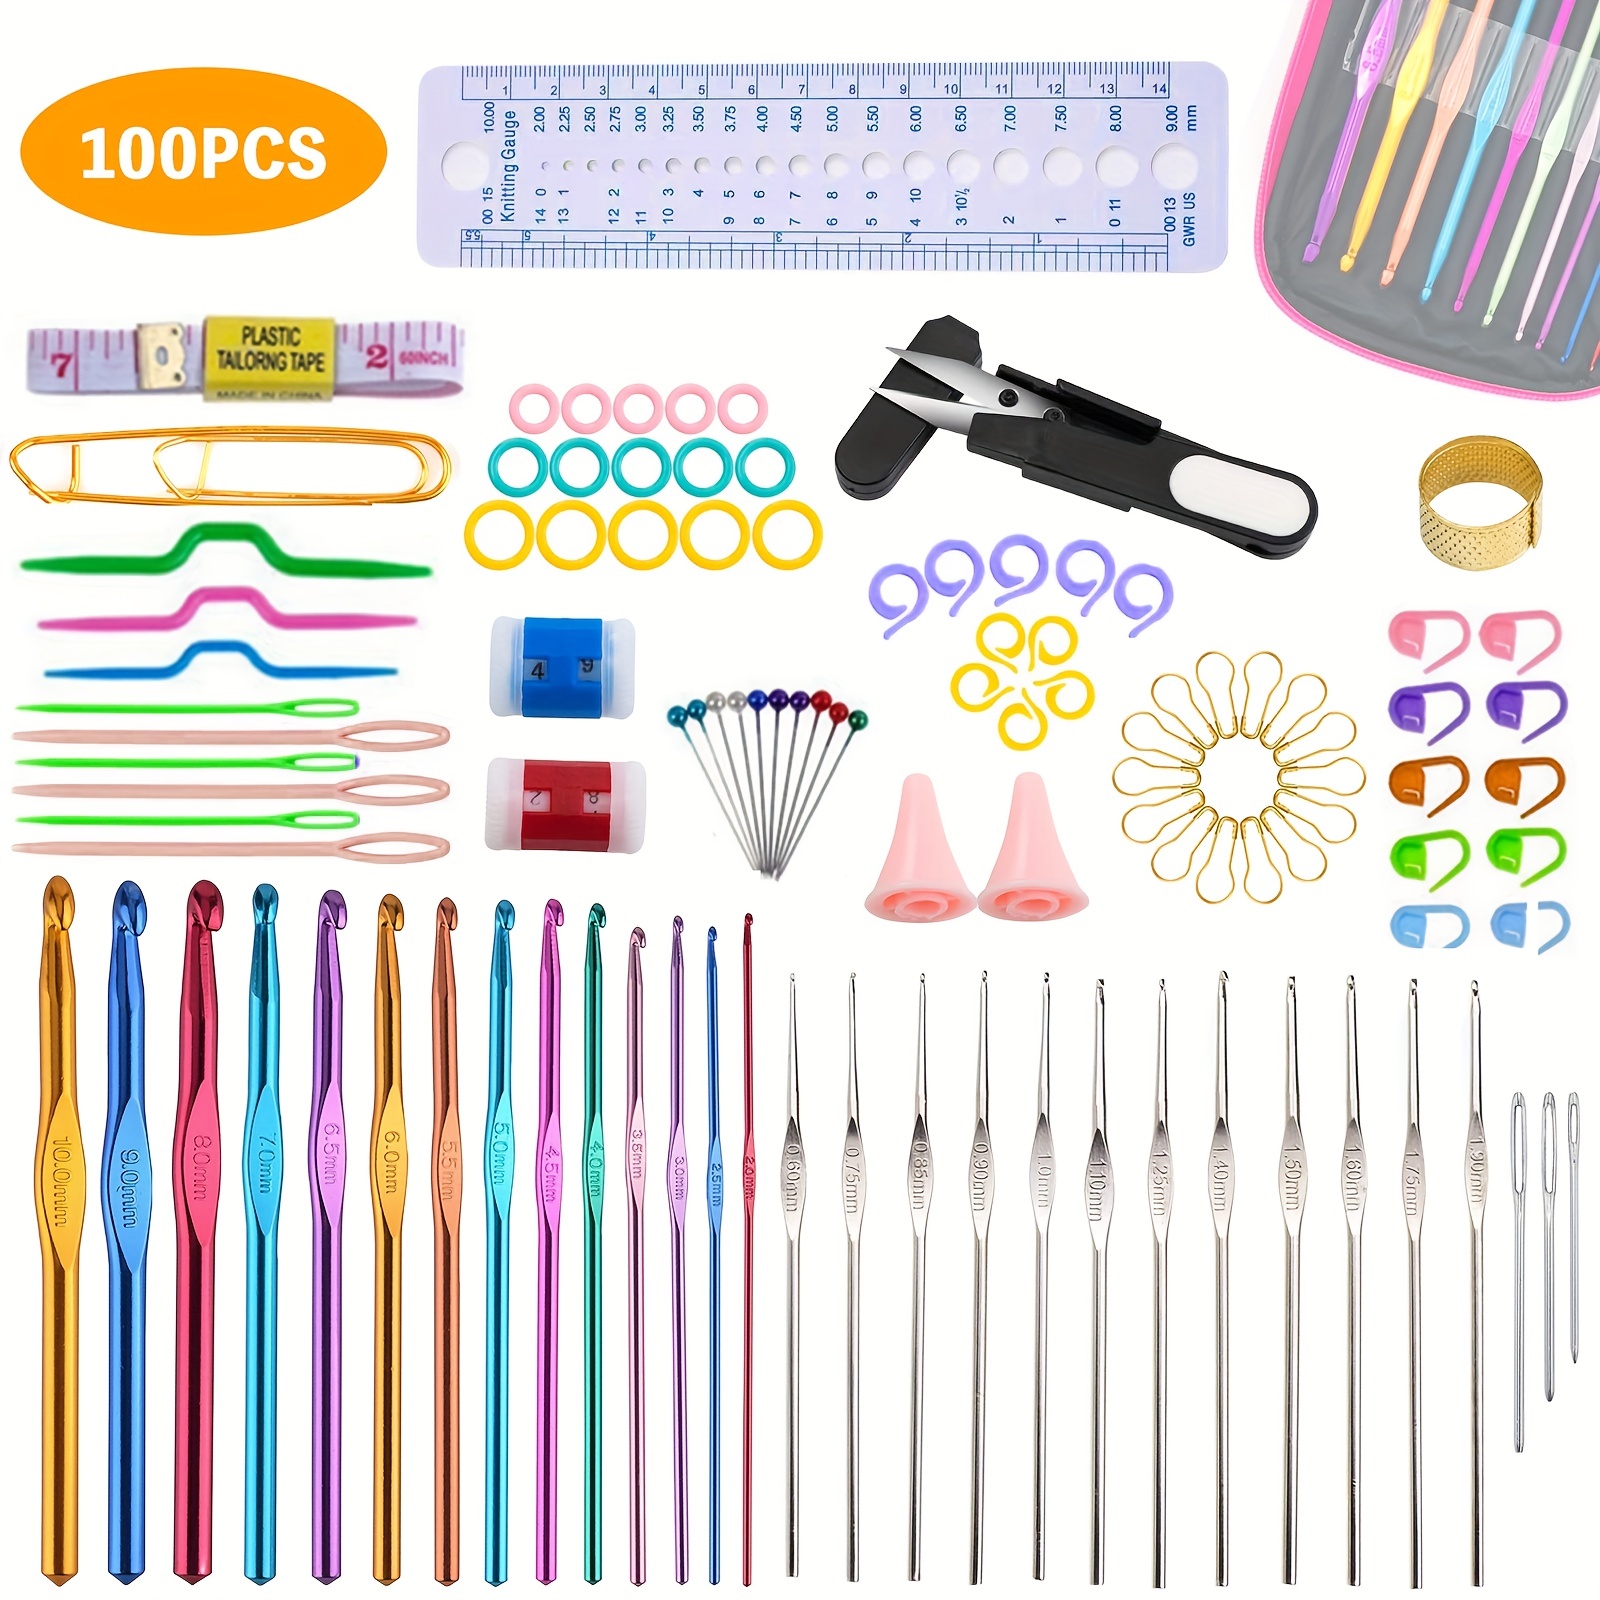 With Yarn Knitting Needles Knit Gauge Scissors Home Needle Arts Crafts DIY  Craft Tools 100 Pcs Stitch Holders Sewing Tools Full Set Crochet Hook Sets  – the best products in the Joom